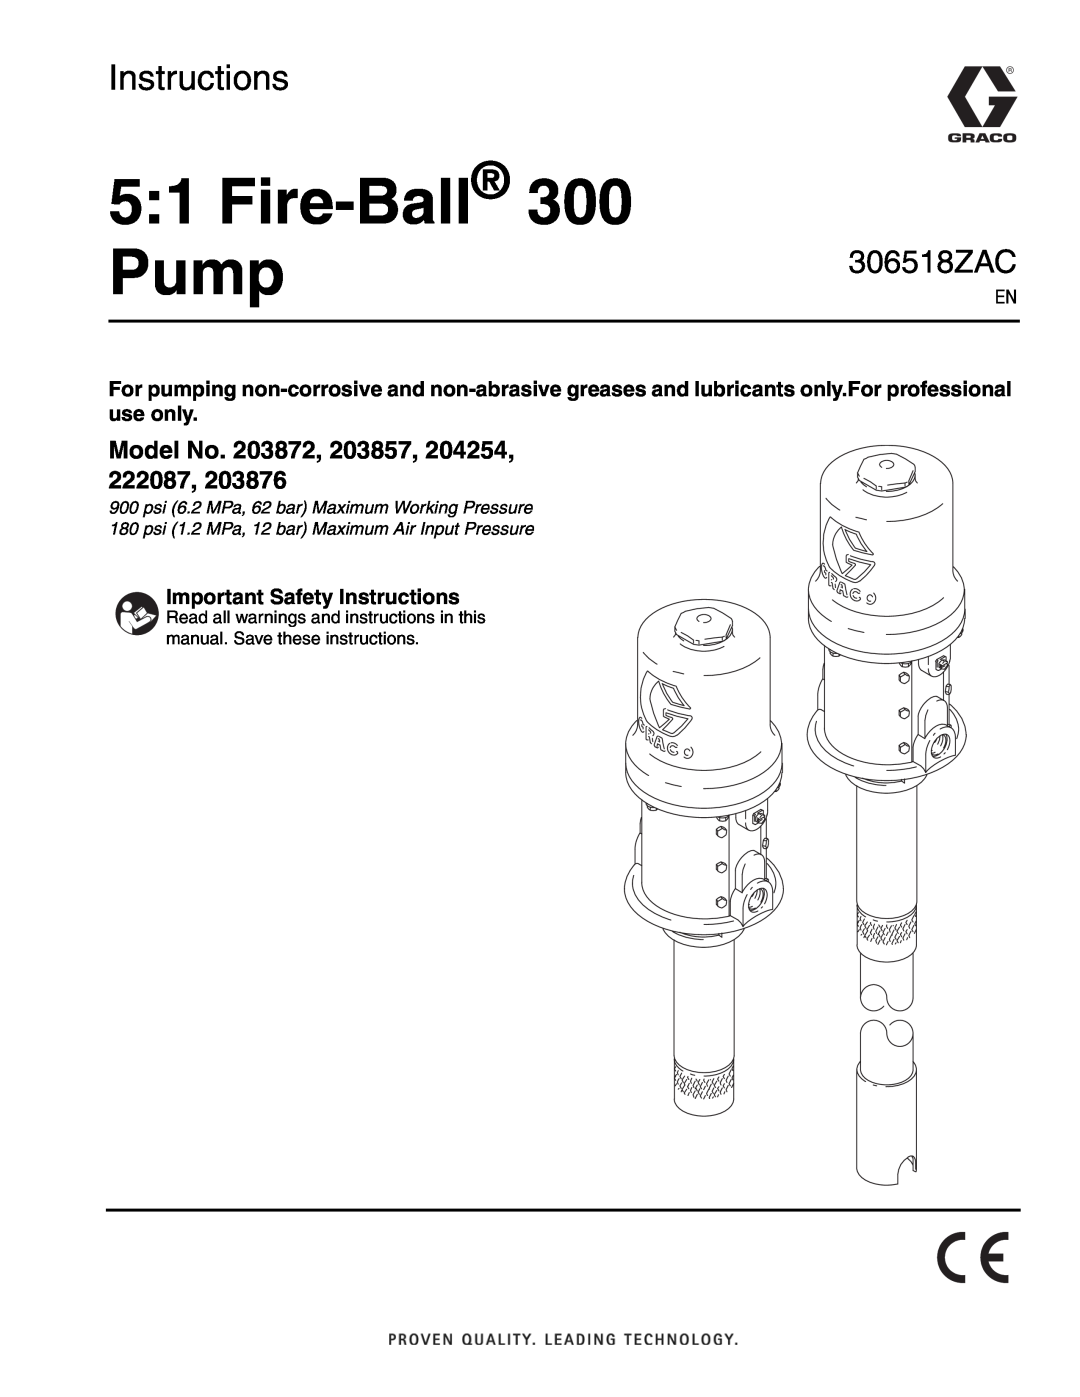 Graco 306518ZAC important safety instructions Important Safety Instructions, 5 1 Fire-Ball 300 Pump, Model No. 203872 